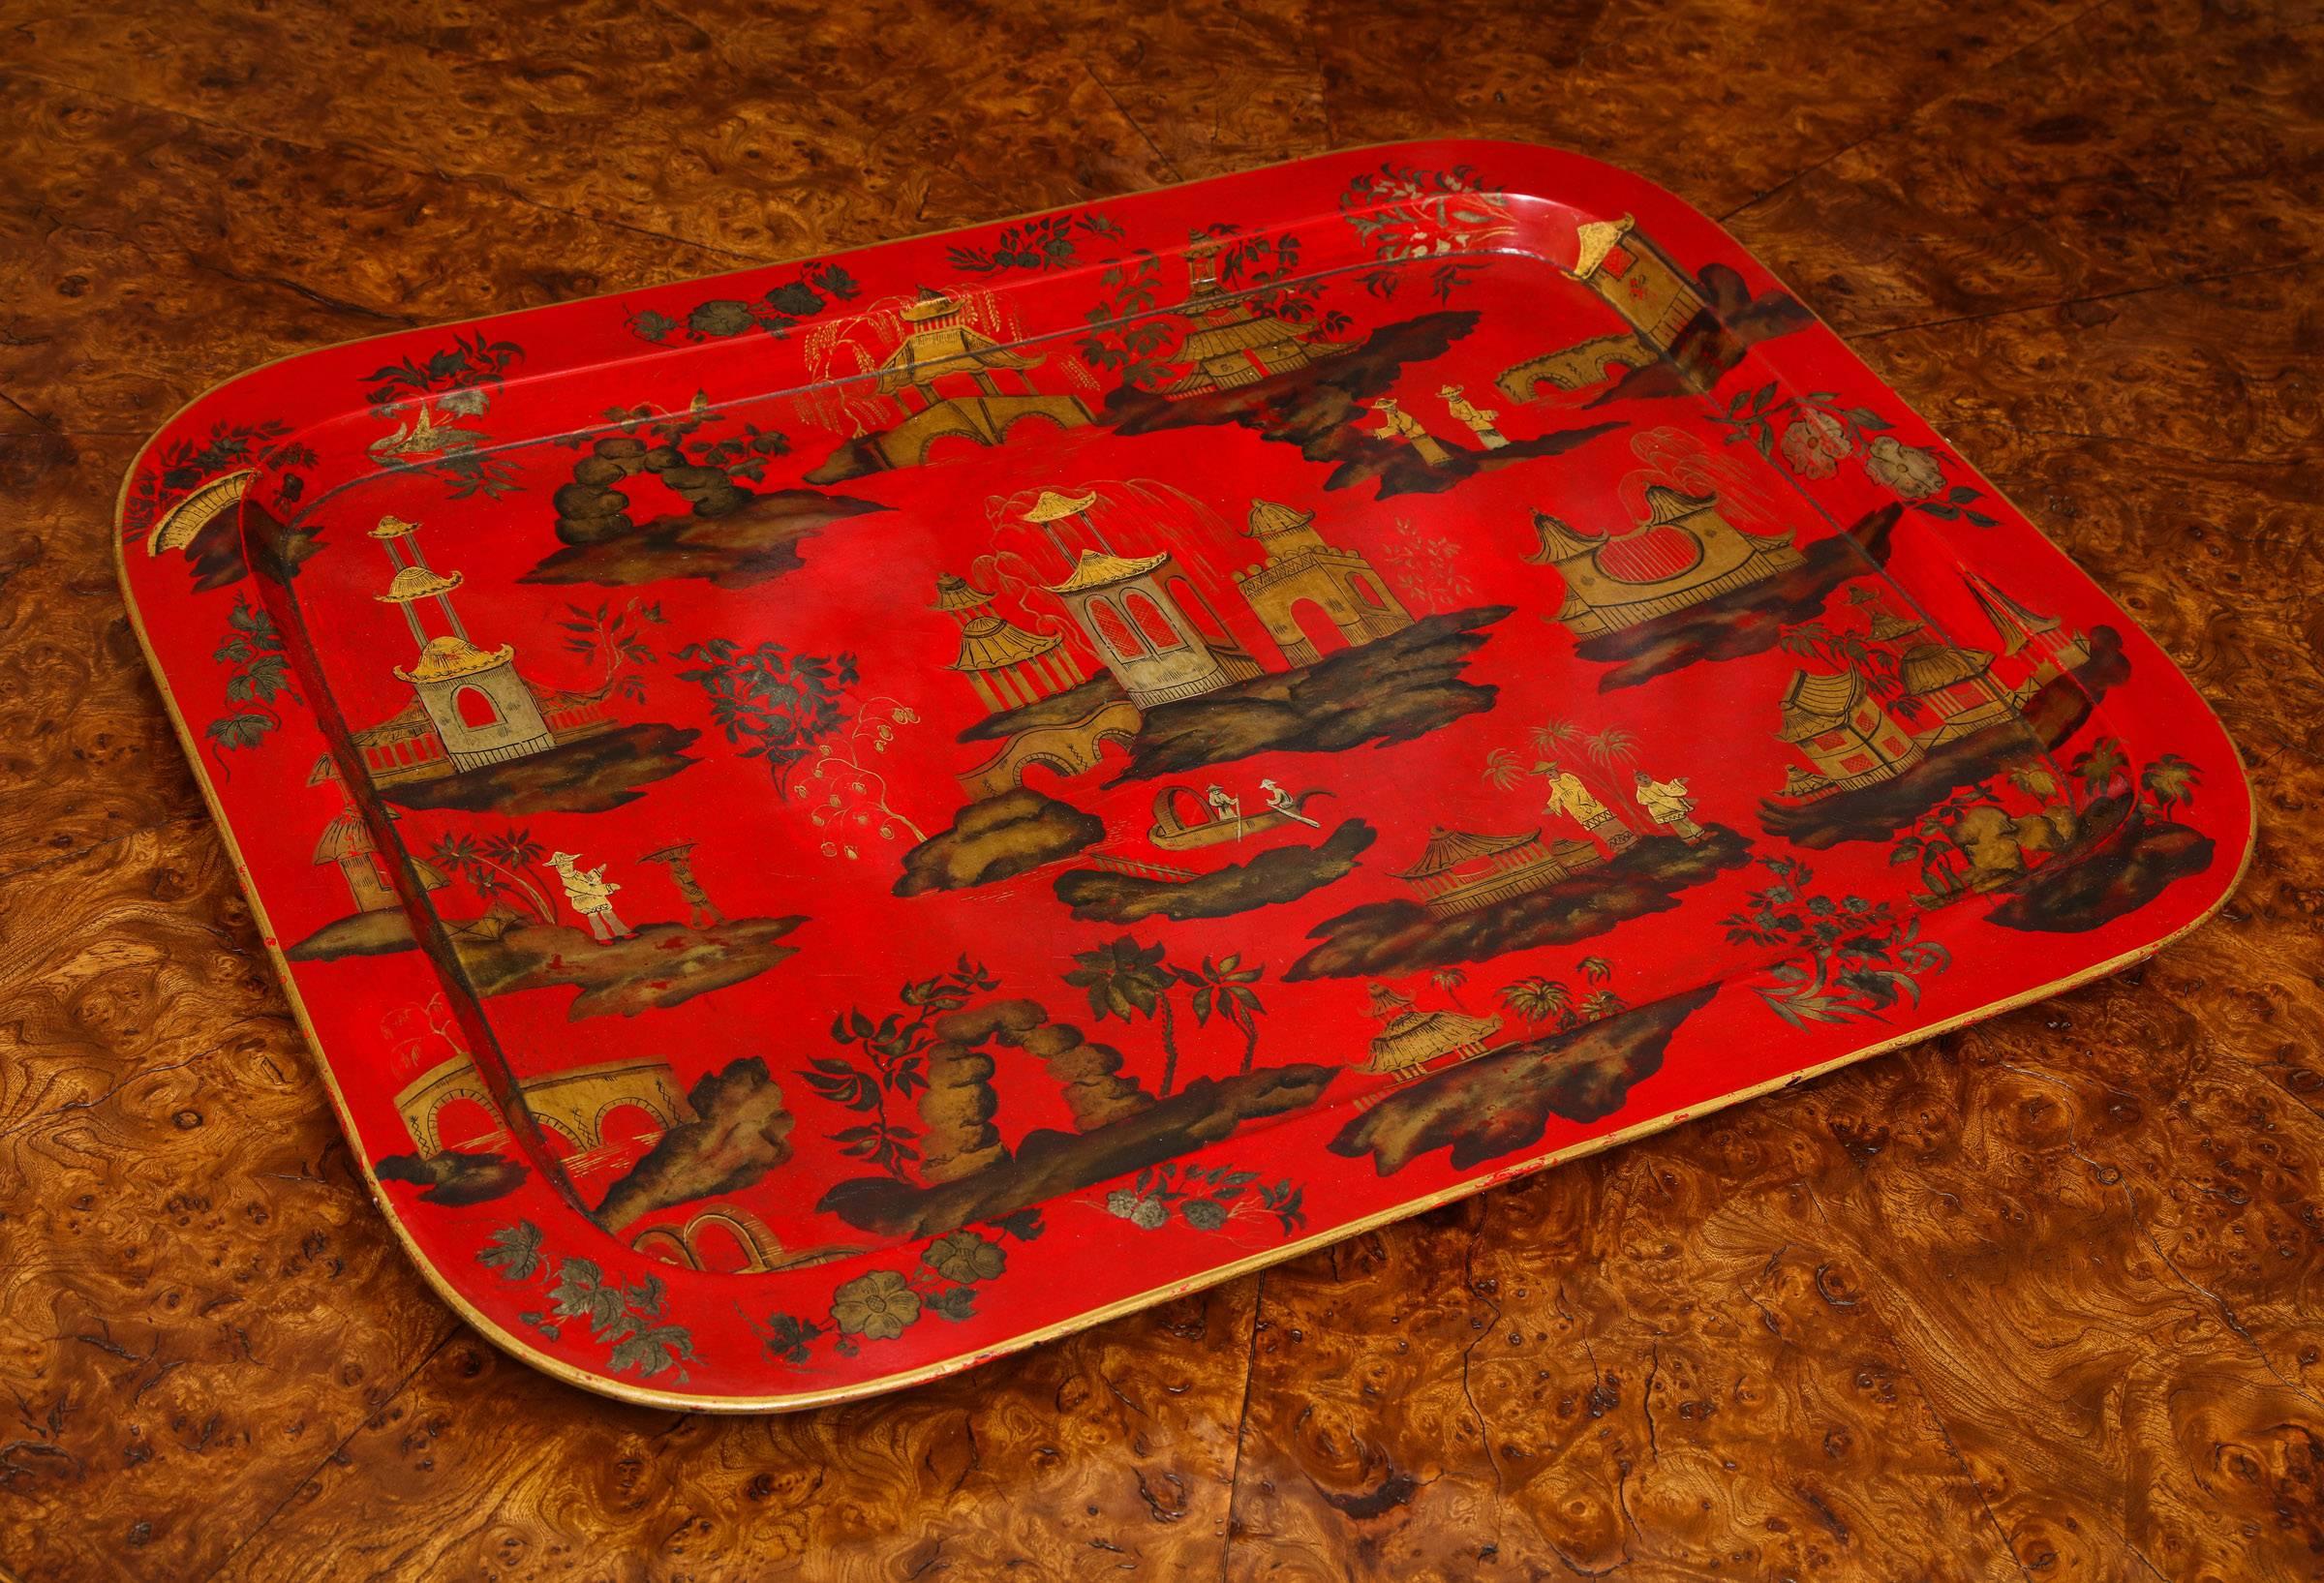 Laminated Regency Chinoiserie Scarlet Papier Mâché Tray English, circa 1820 In Stock For Sale